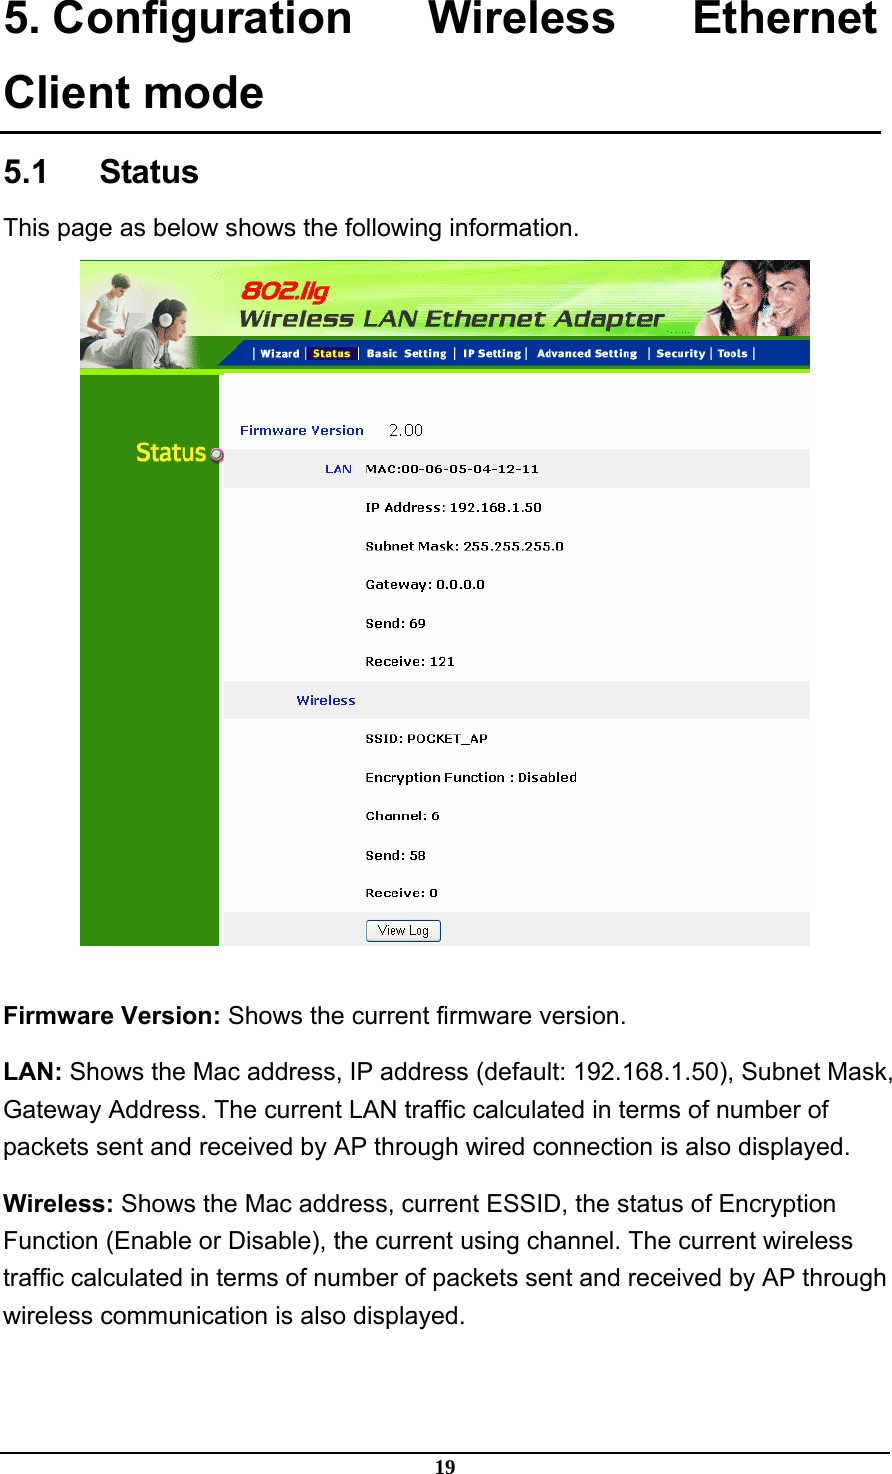 19 5. Configuration Wireless Ethernet Client mode 5.1   Status This page as below shows the following information.   Firmware Version: Shows the current firmware version. LAN: Shows the Mac address, IP address (default: 192.168.1.50), Subnet Mask, Gateway Address. The current LAN traffic calculated in terms of number of packets sent and received by AP through wired connection is also displayed. Wireless: Shows the Mac address, current ESSID, the status of Encryption Function (Enable or Disable), the current using channel. The current wireless traffic calculated in terms of number of packets sent and received by AP through wireless communication is also displayed. 